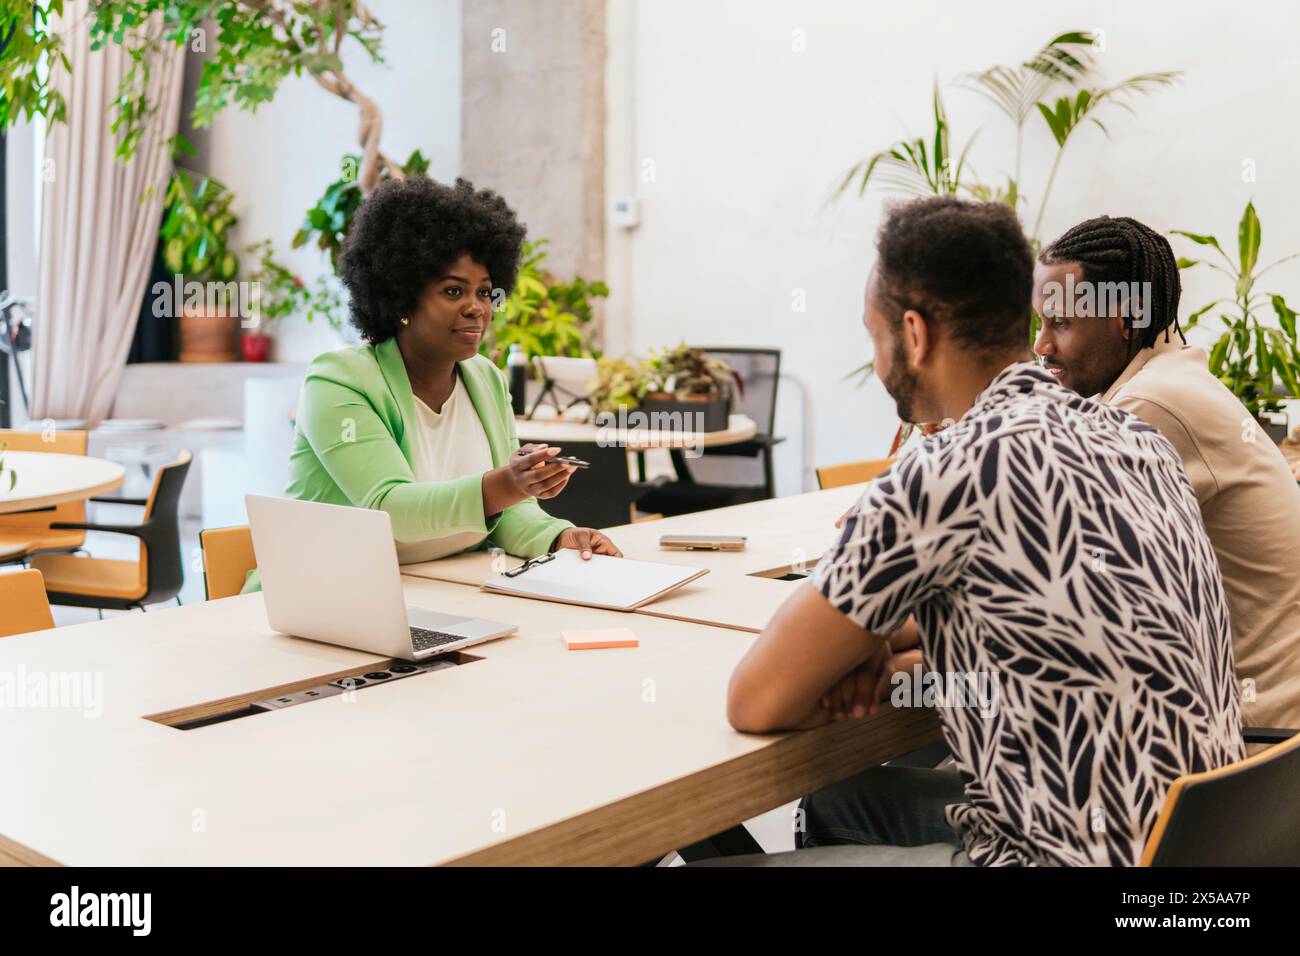 A professional, multicultural team engages in a discussion at a stylish coworking space, highlighting teamwork and creativity in a casual environment Stock Photo